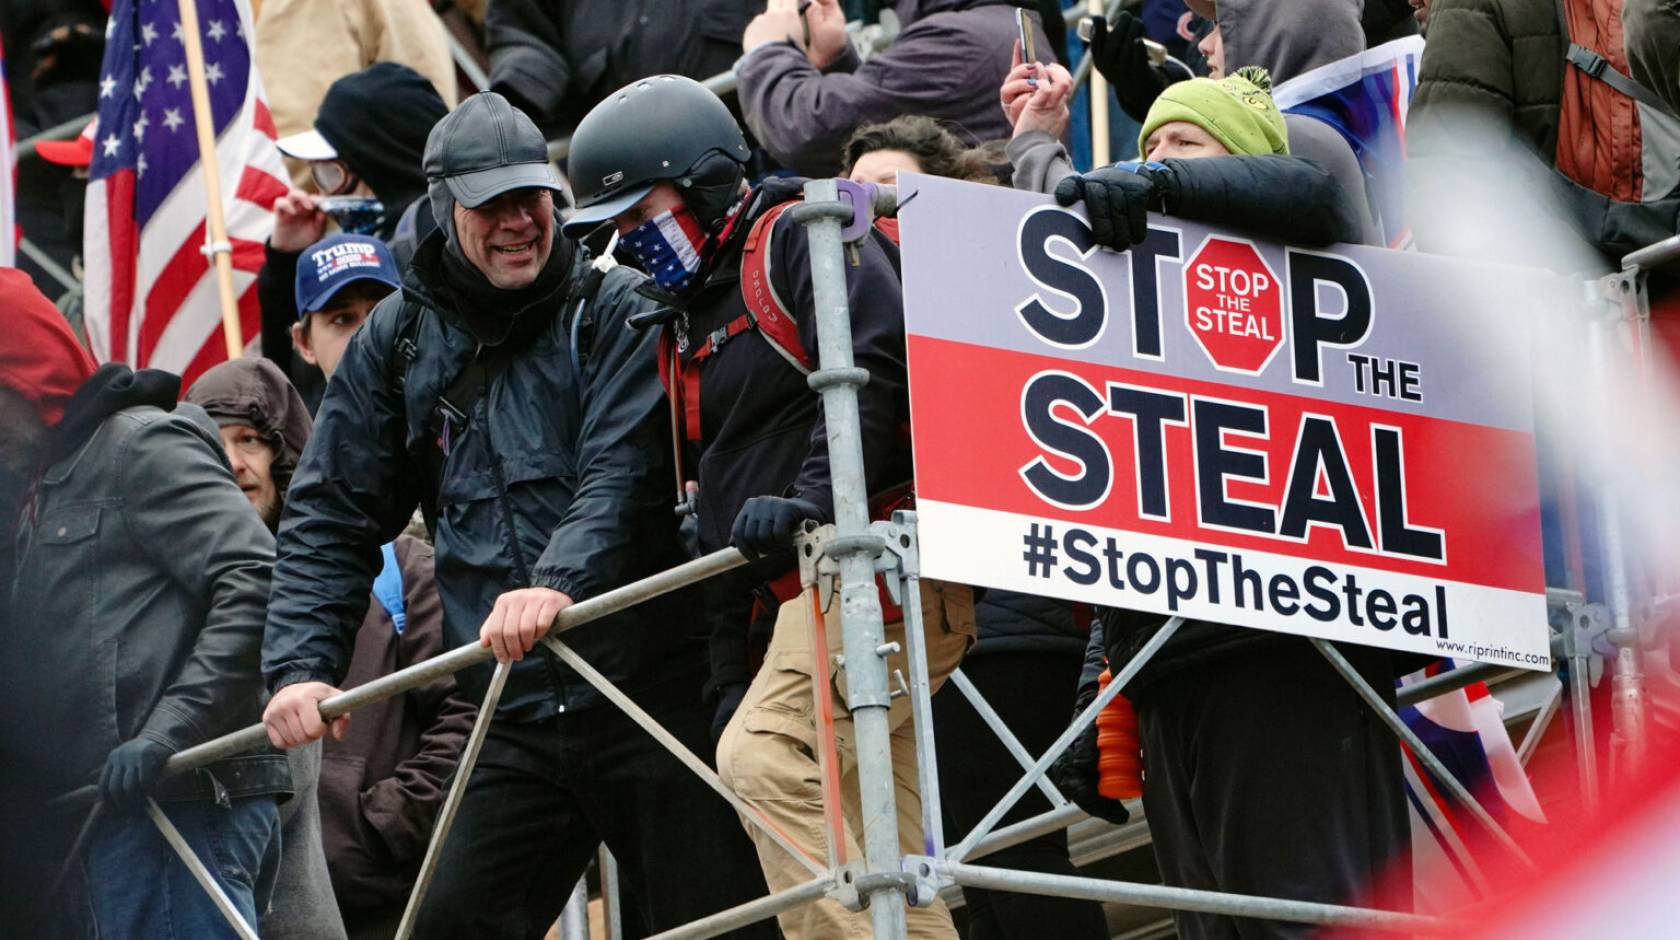 People wearing tactical gear attack the Capitol on Jan 6th, with a big sign reading "Stop the Steal"